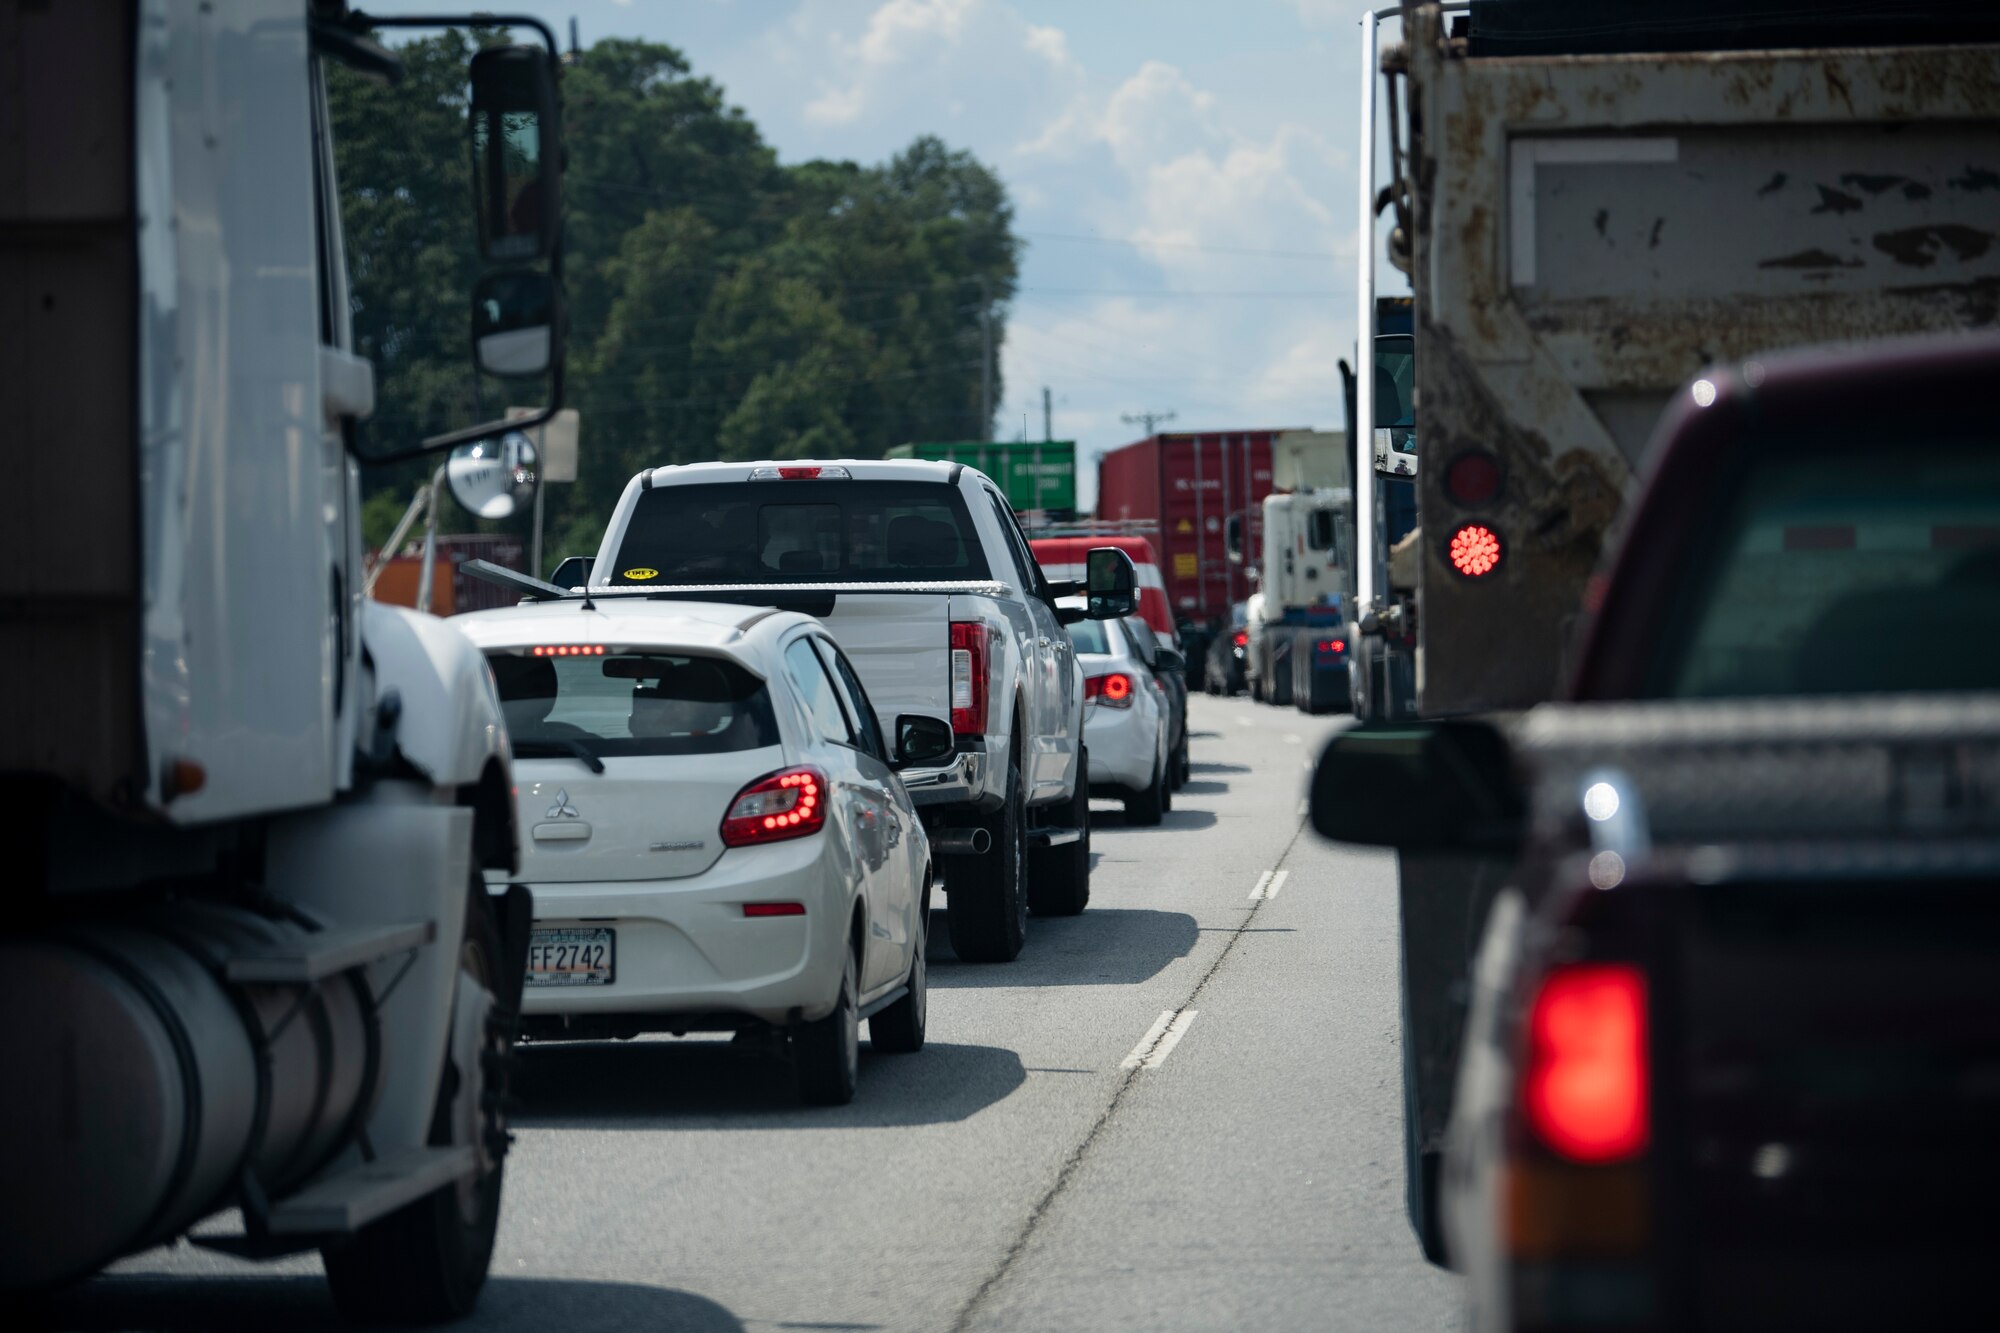 Residents of South Carolina move very slowly down US highway 278 after their Governor issued a mandatory evacuation of the costal cities in preparation of hurricane Florance's impending flooding, winds and rain. (U.S. Air Force Photo by Technical Sgt. Chris Hibben)